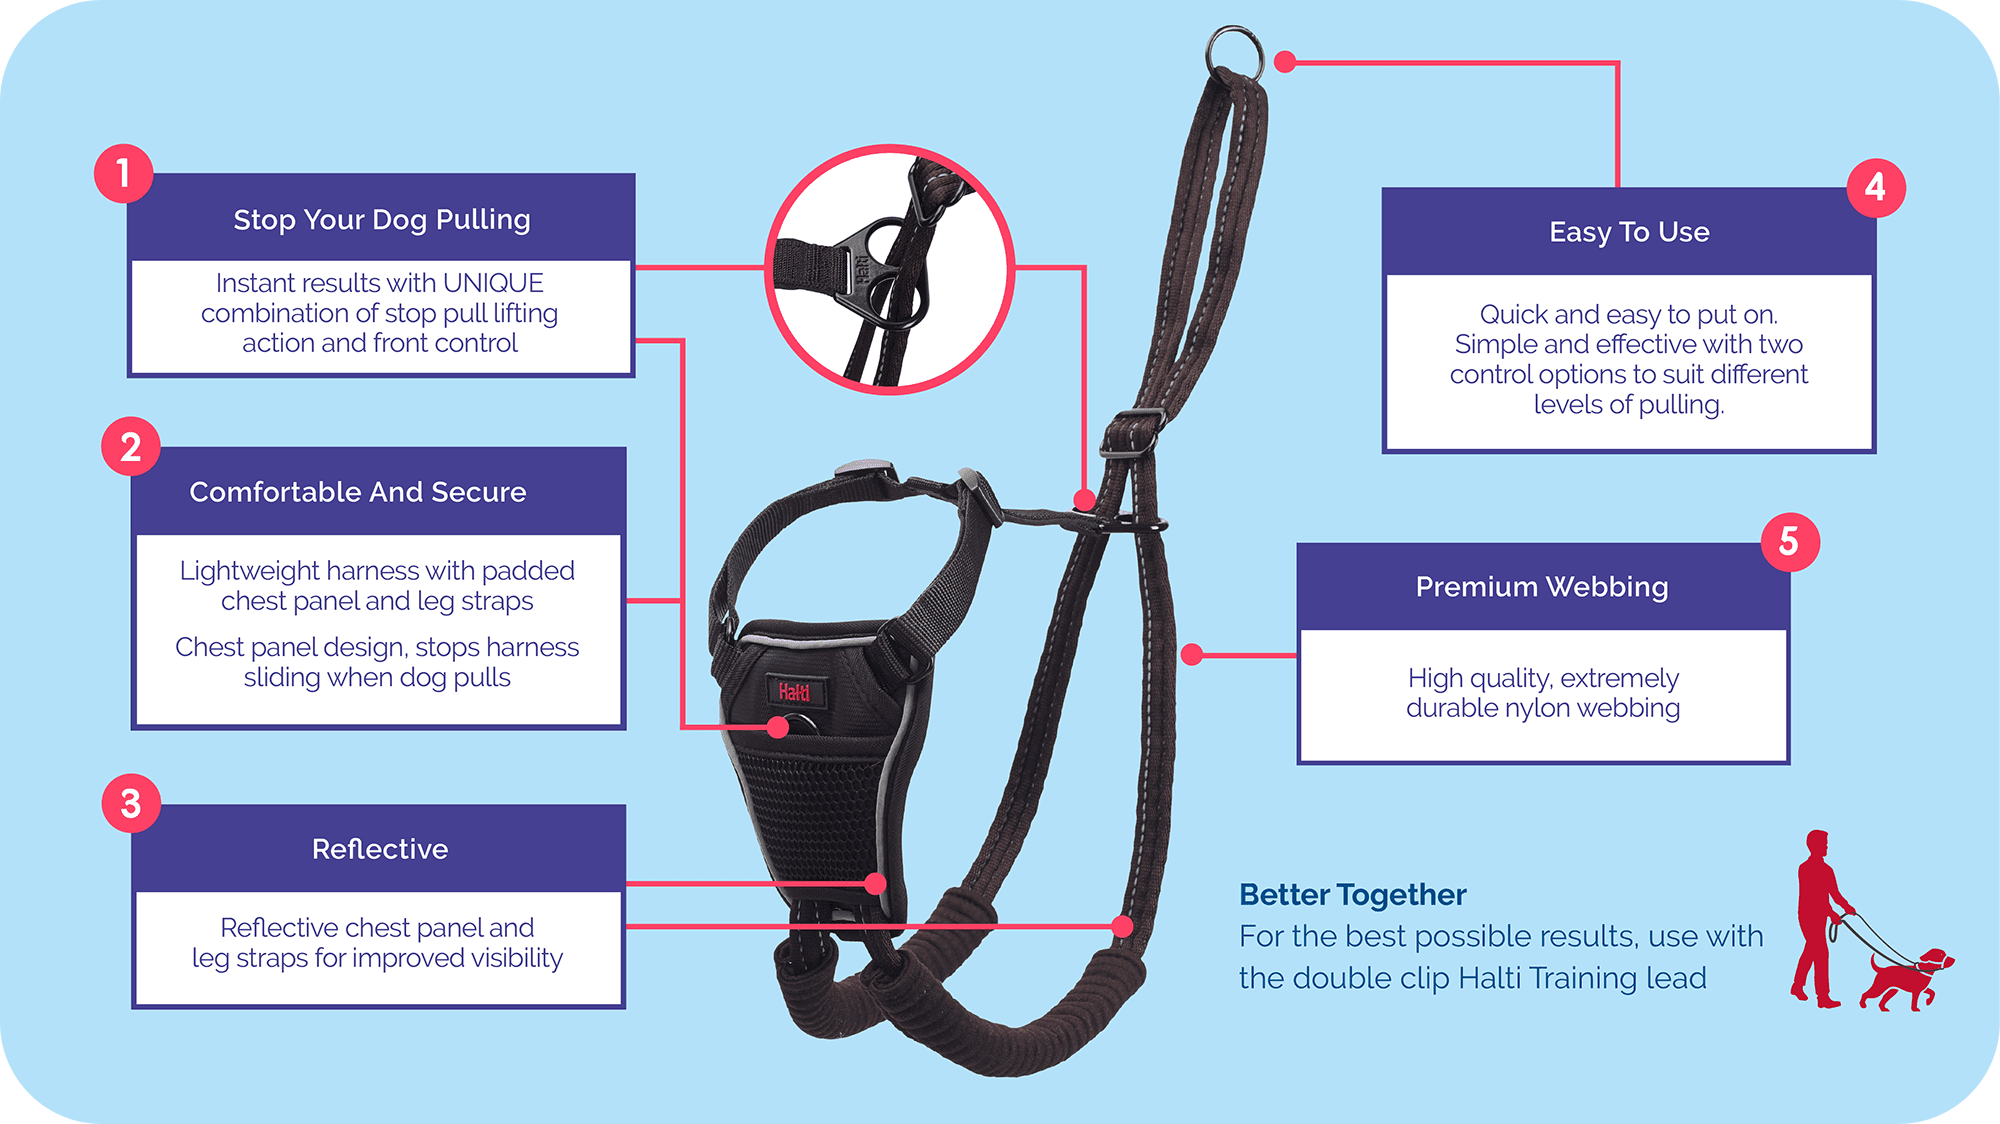 Features Guide for Halti No Pull Harness